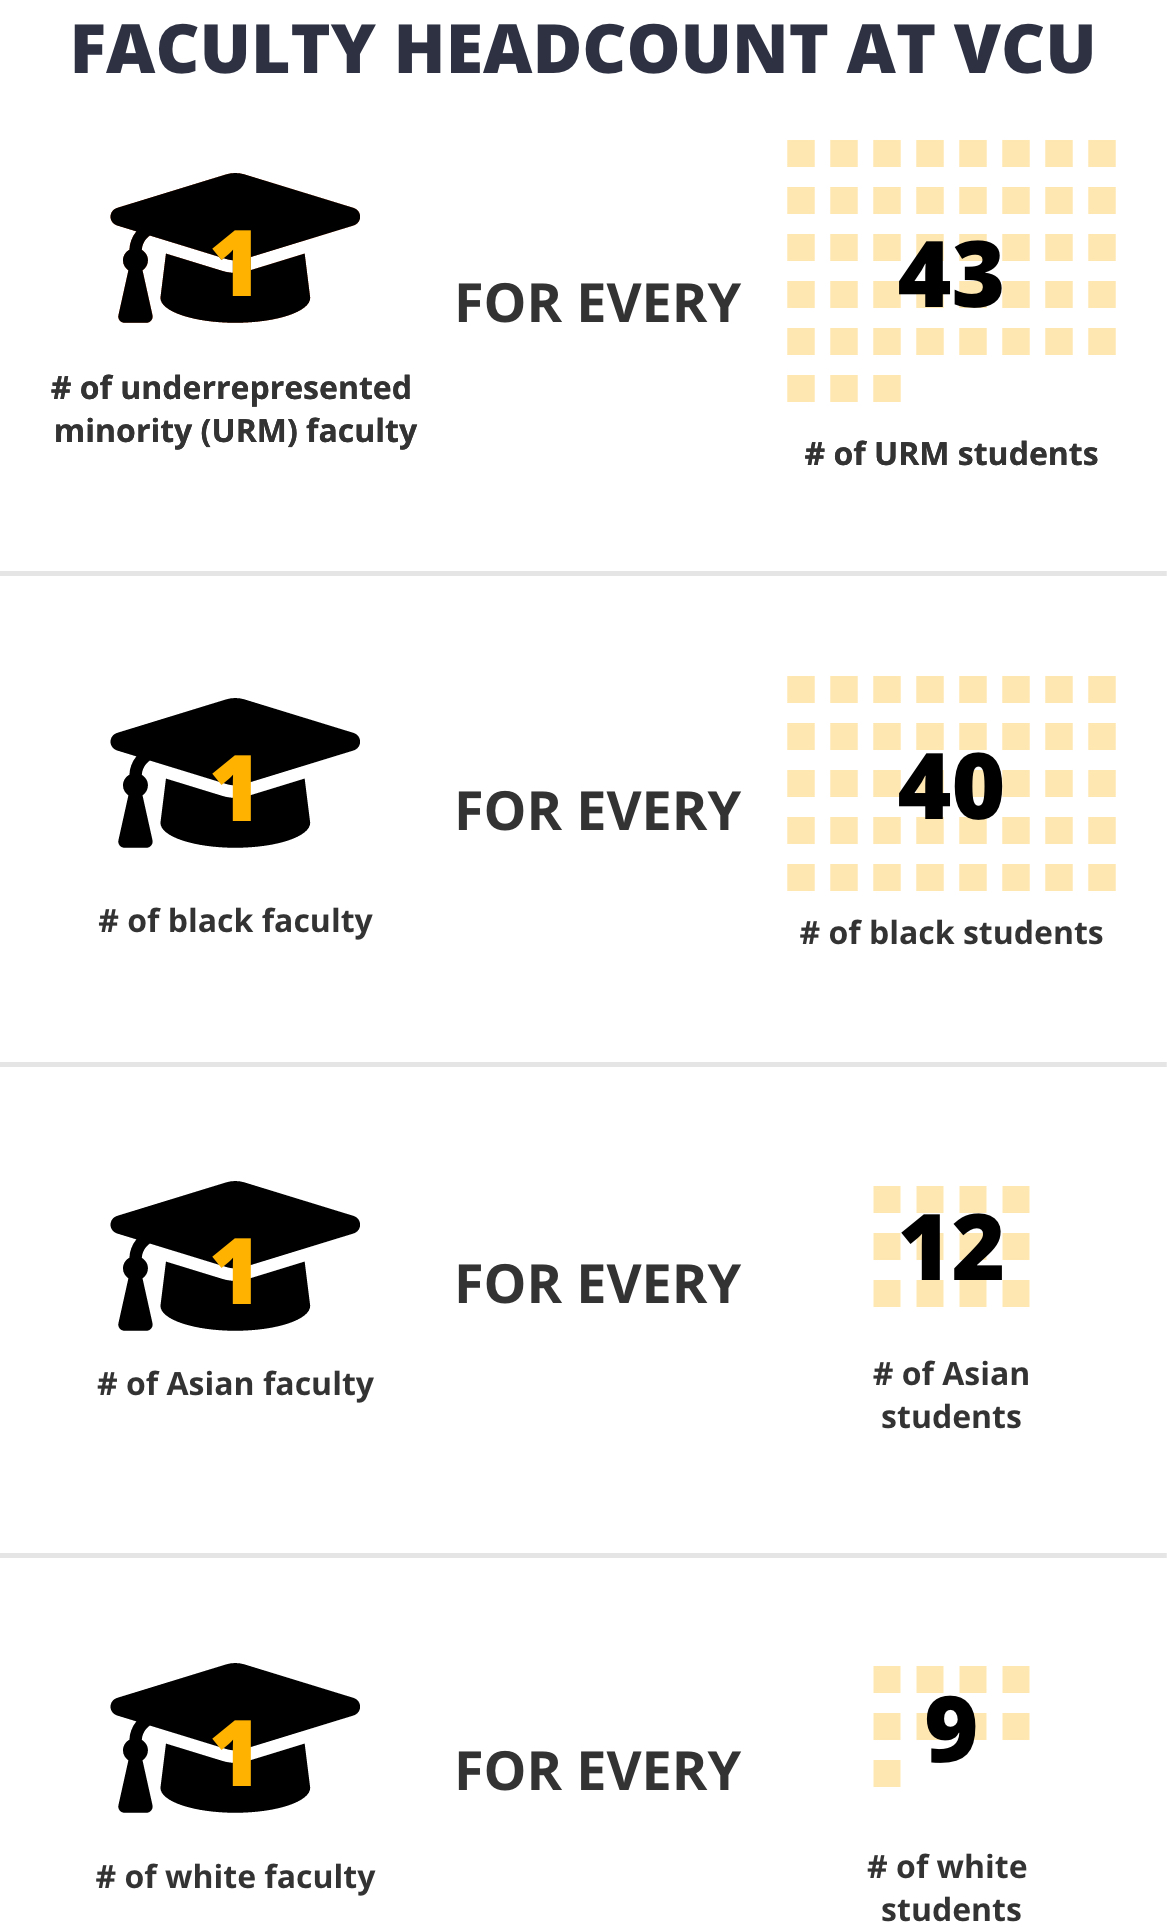 Proportion between specific faculty and student groups at VCU